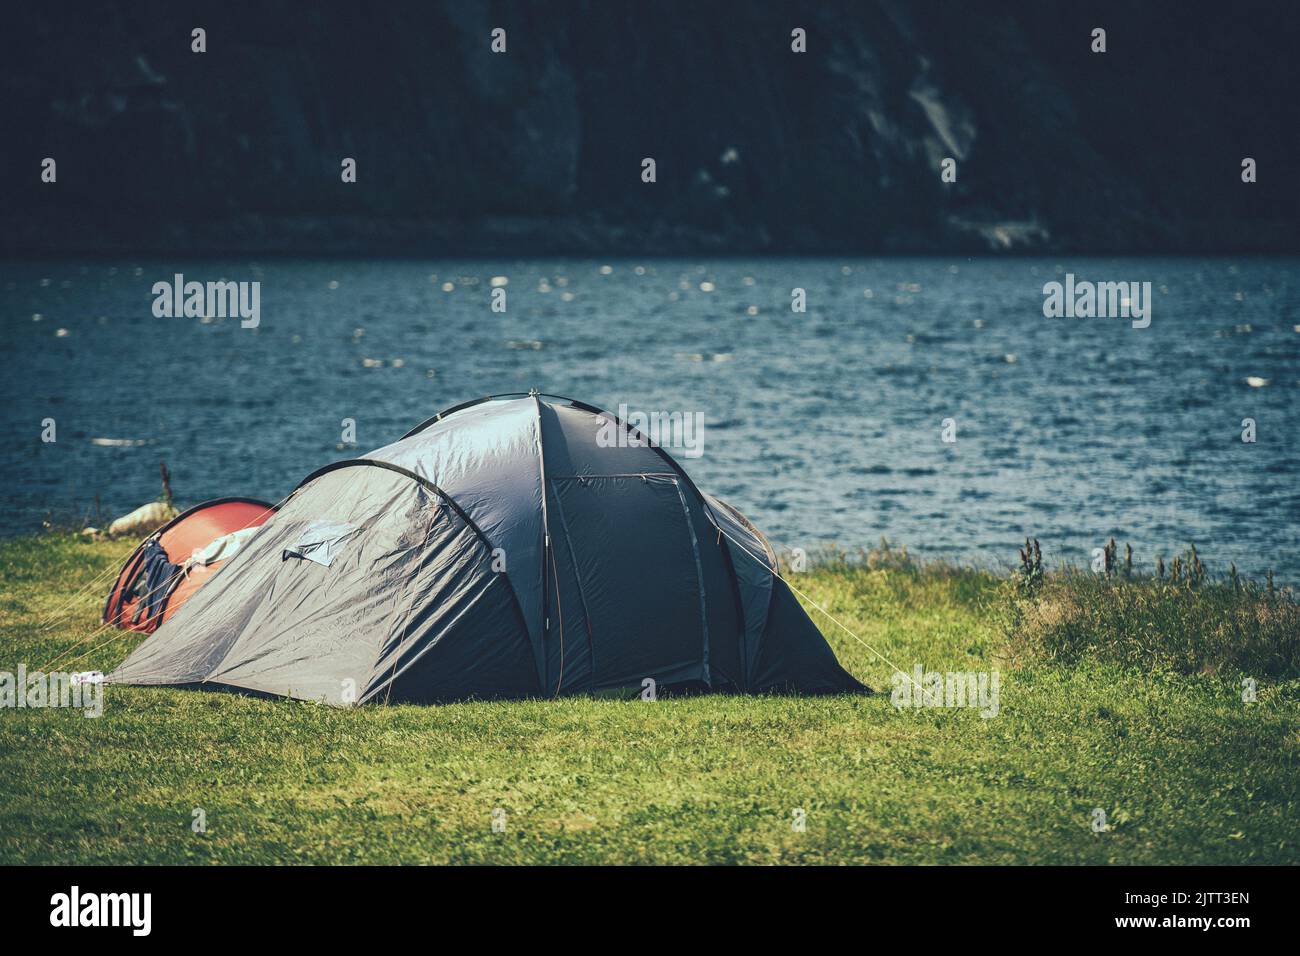 Closeup of a Tent Pitched on the Green Lake Shore with Mountain Wall in the Background. Scenic Camping Spot. Traveler Lifestyle. Outdoor Stay Theme. Stock Photo